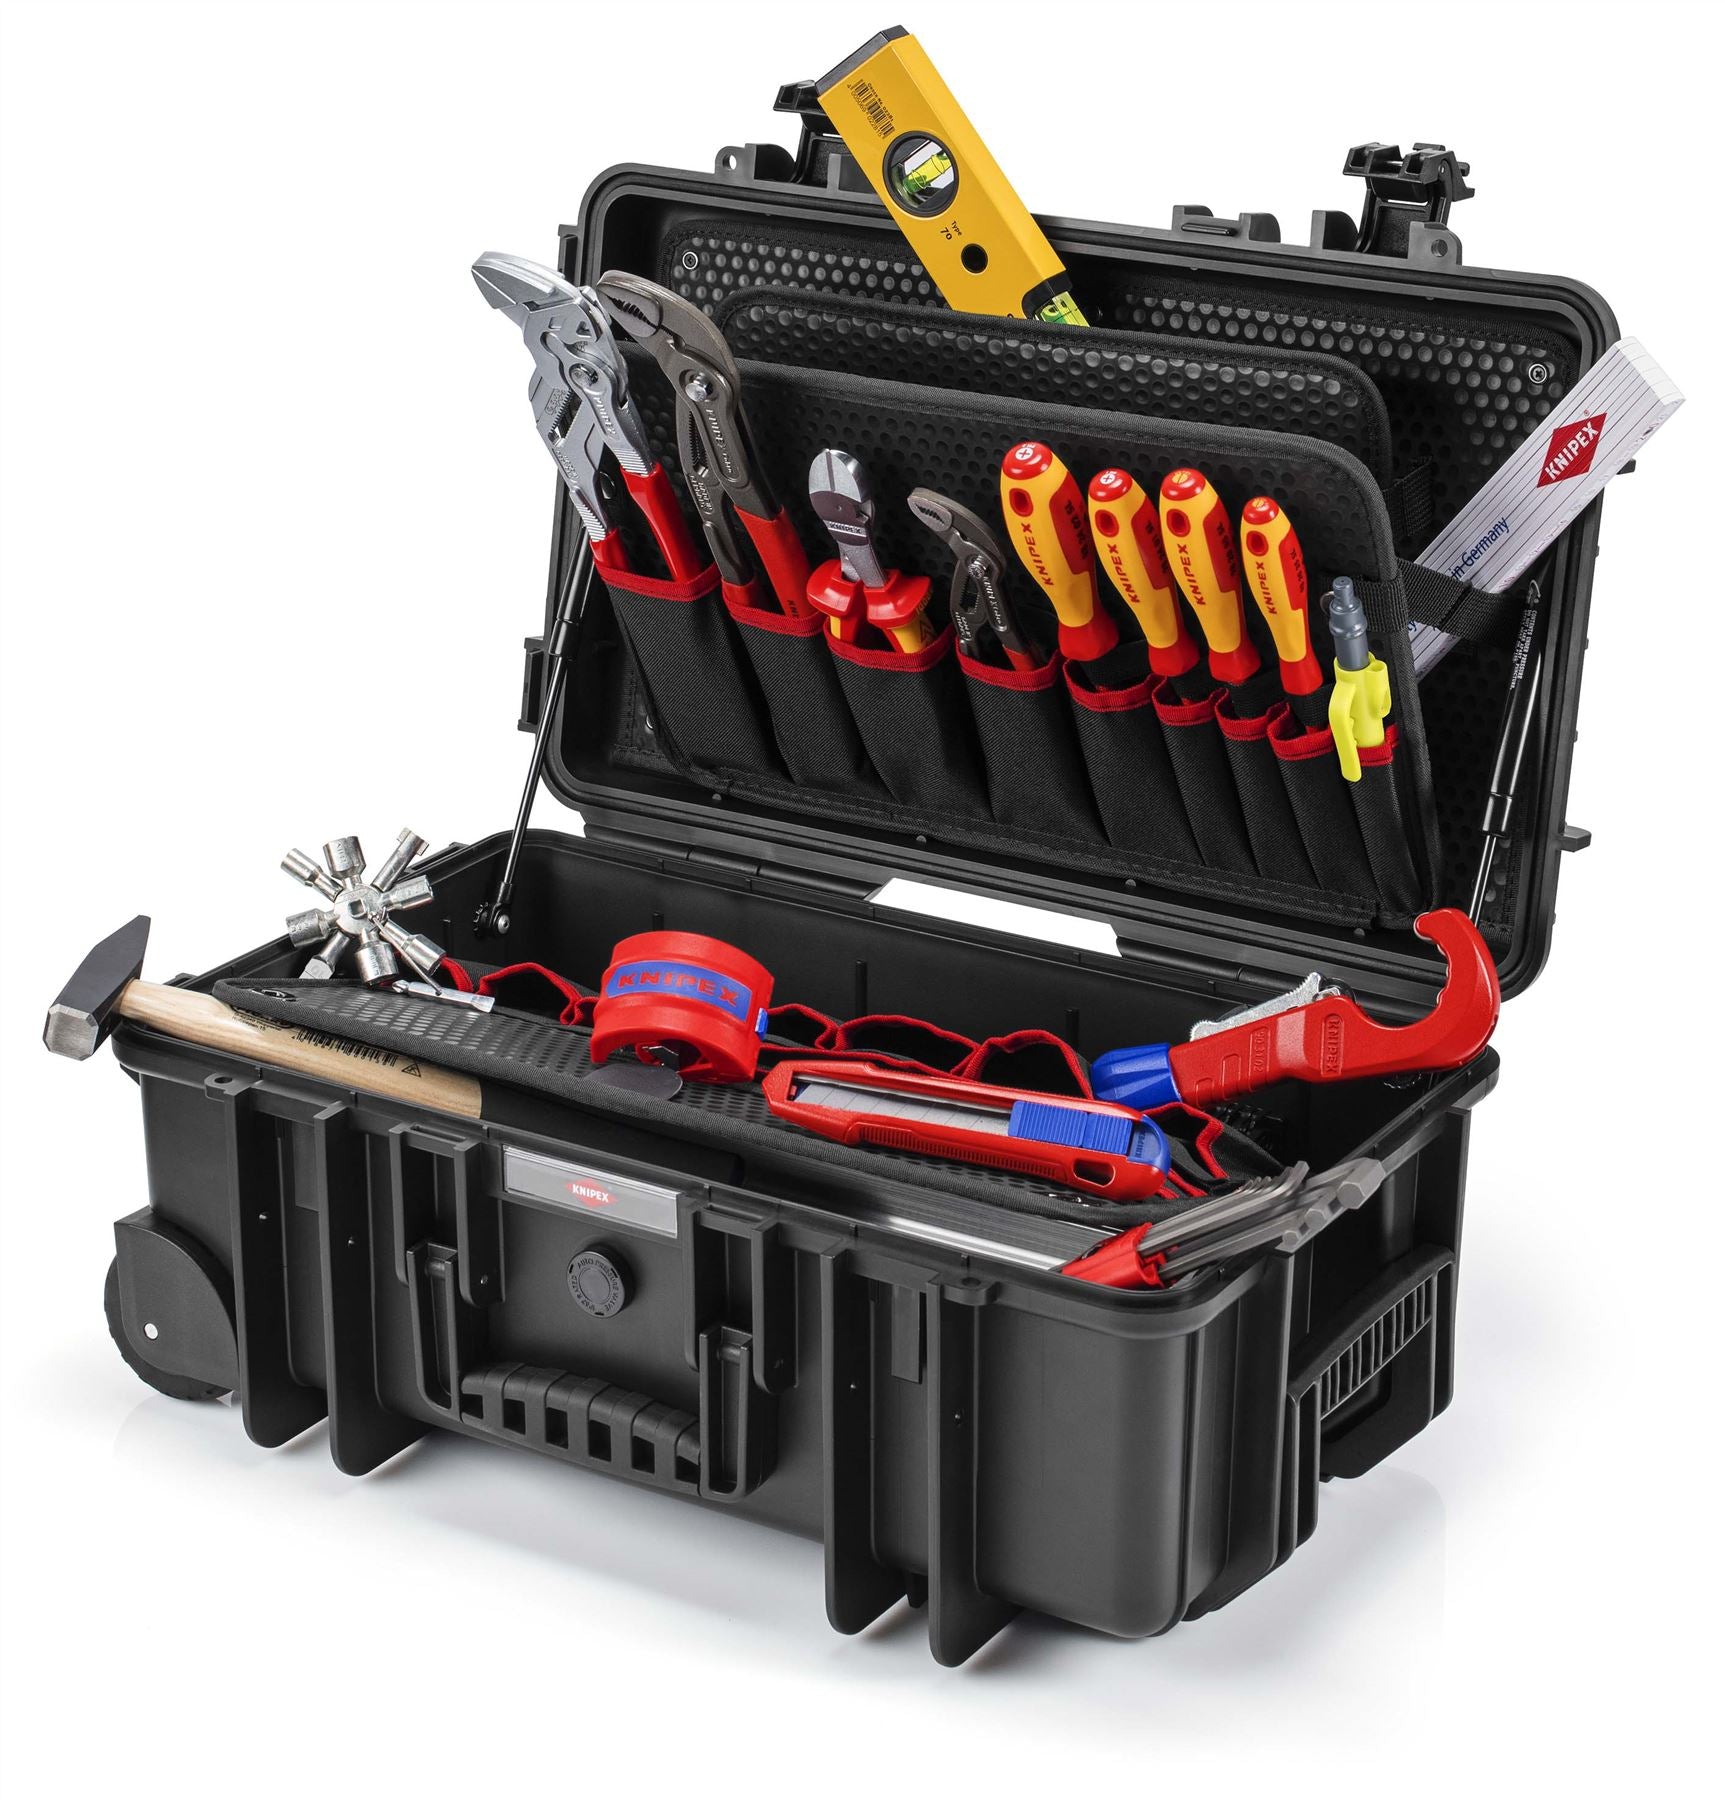 Knipex Tool Case Robust26 Plumbing Fit to Fly Storage Box 00 21 33 S